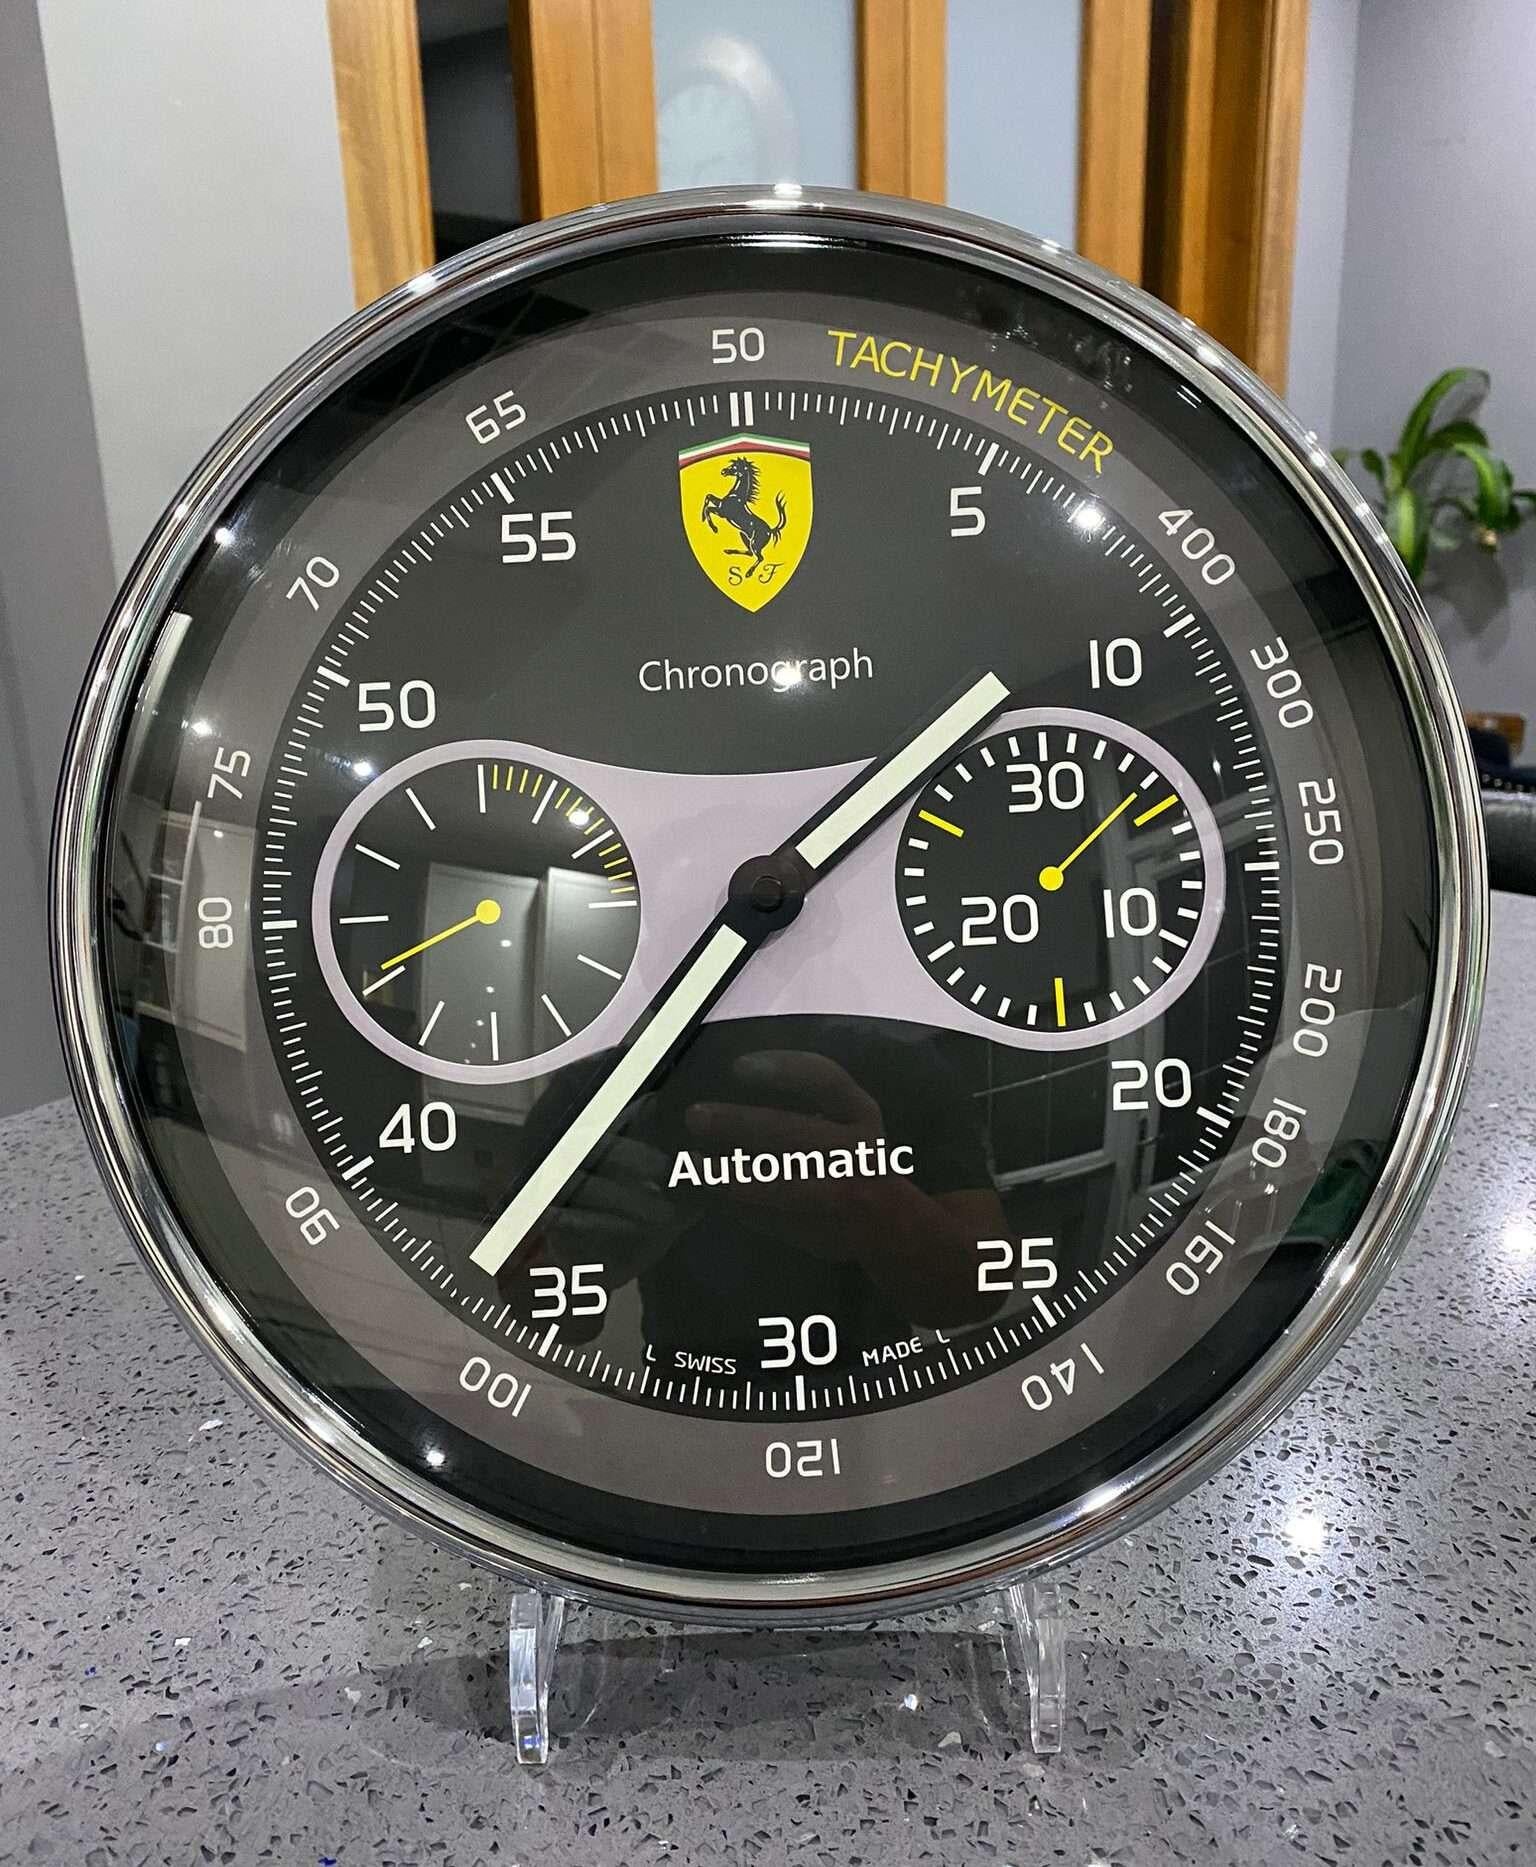 Ferrari Officially Certified Chronograph Chrome Wall Clock. With luminous hands, sweeping hands.
Free international shipping.